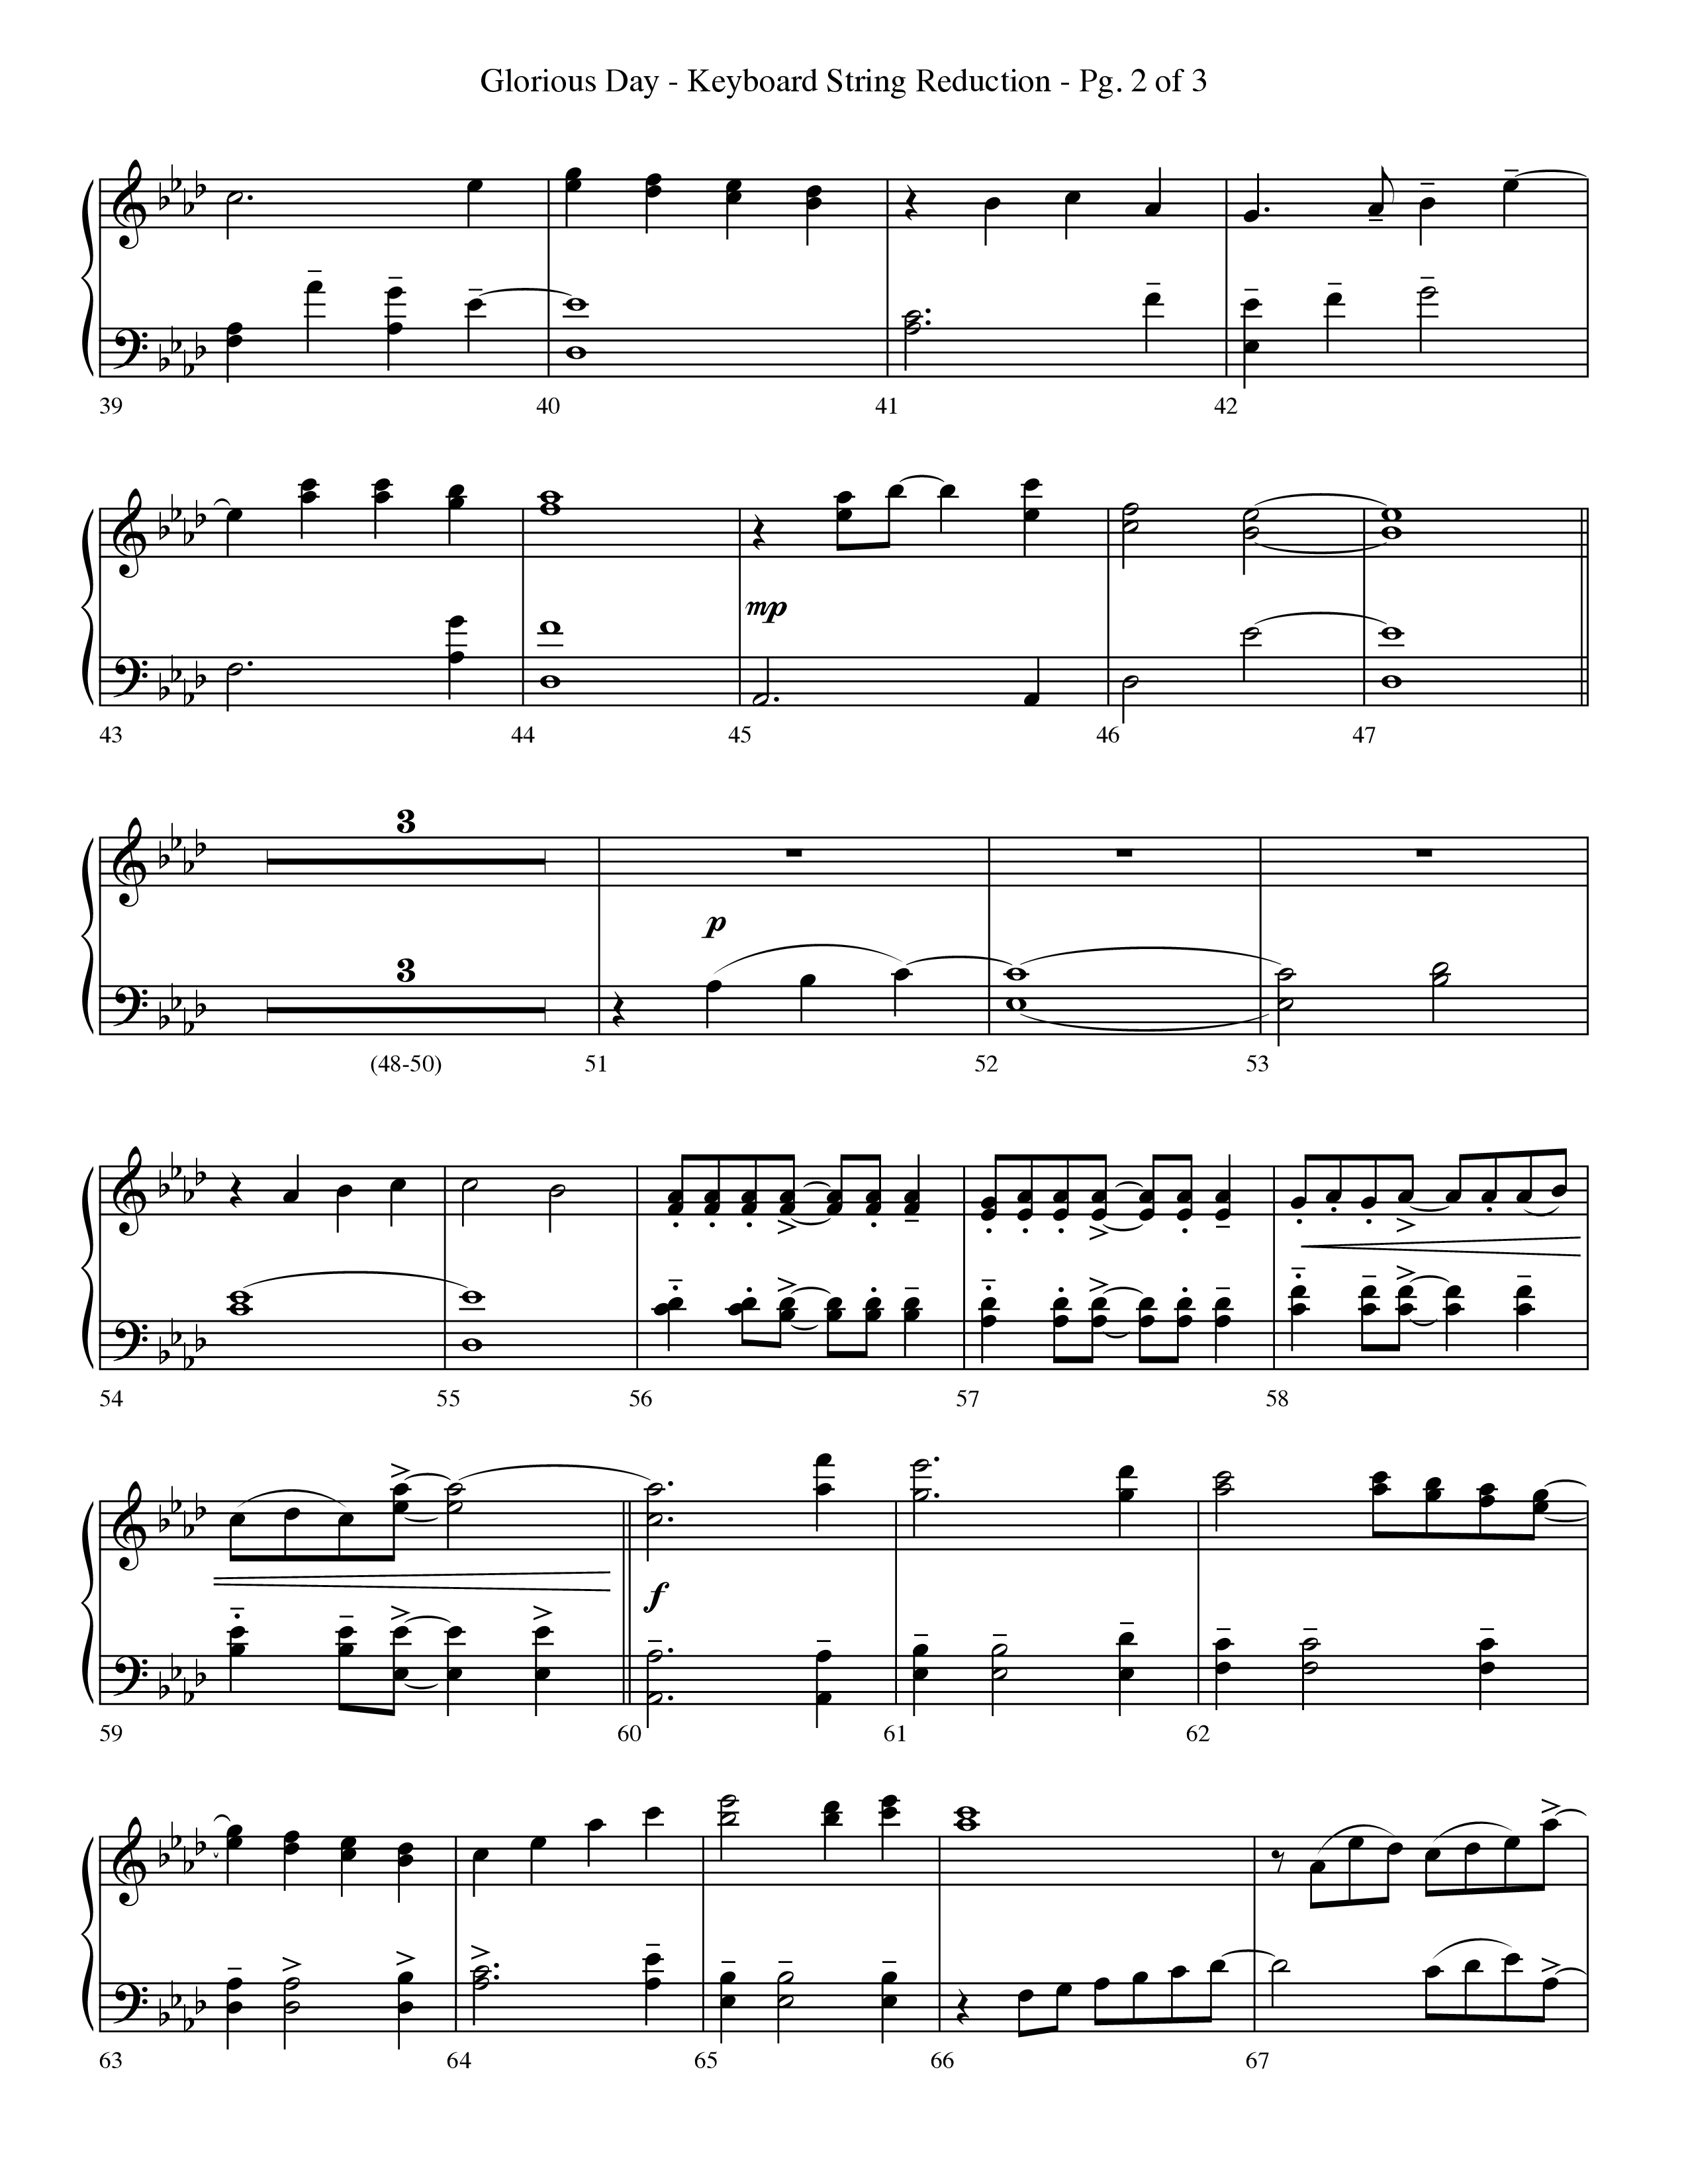 Glorious Day (Living He Loved Me) (Choral Anthem SATB) String Reduction (Lifeway Choral / Arr. Travis Cottrell / Orch. Phillip Keveren)